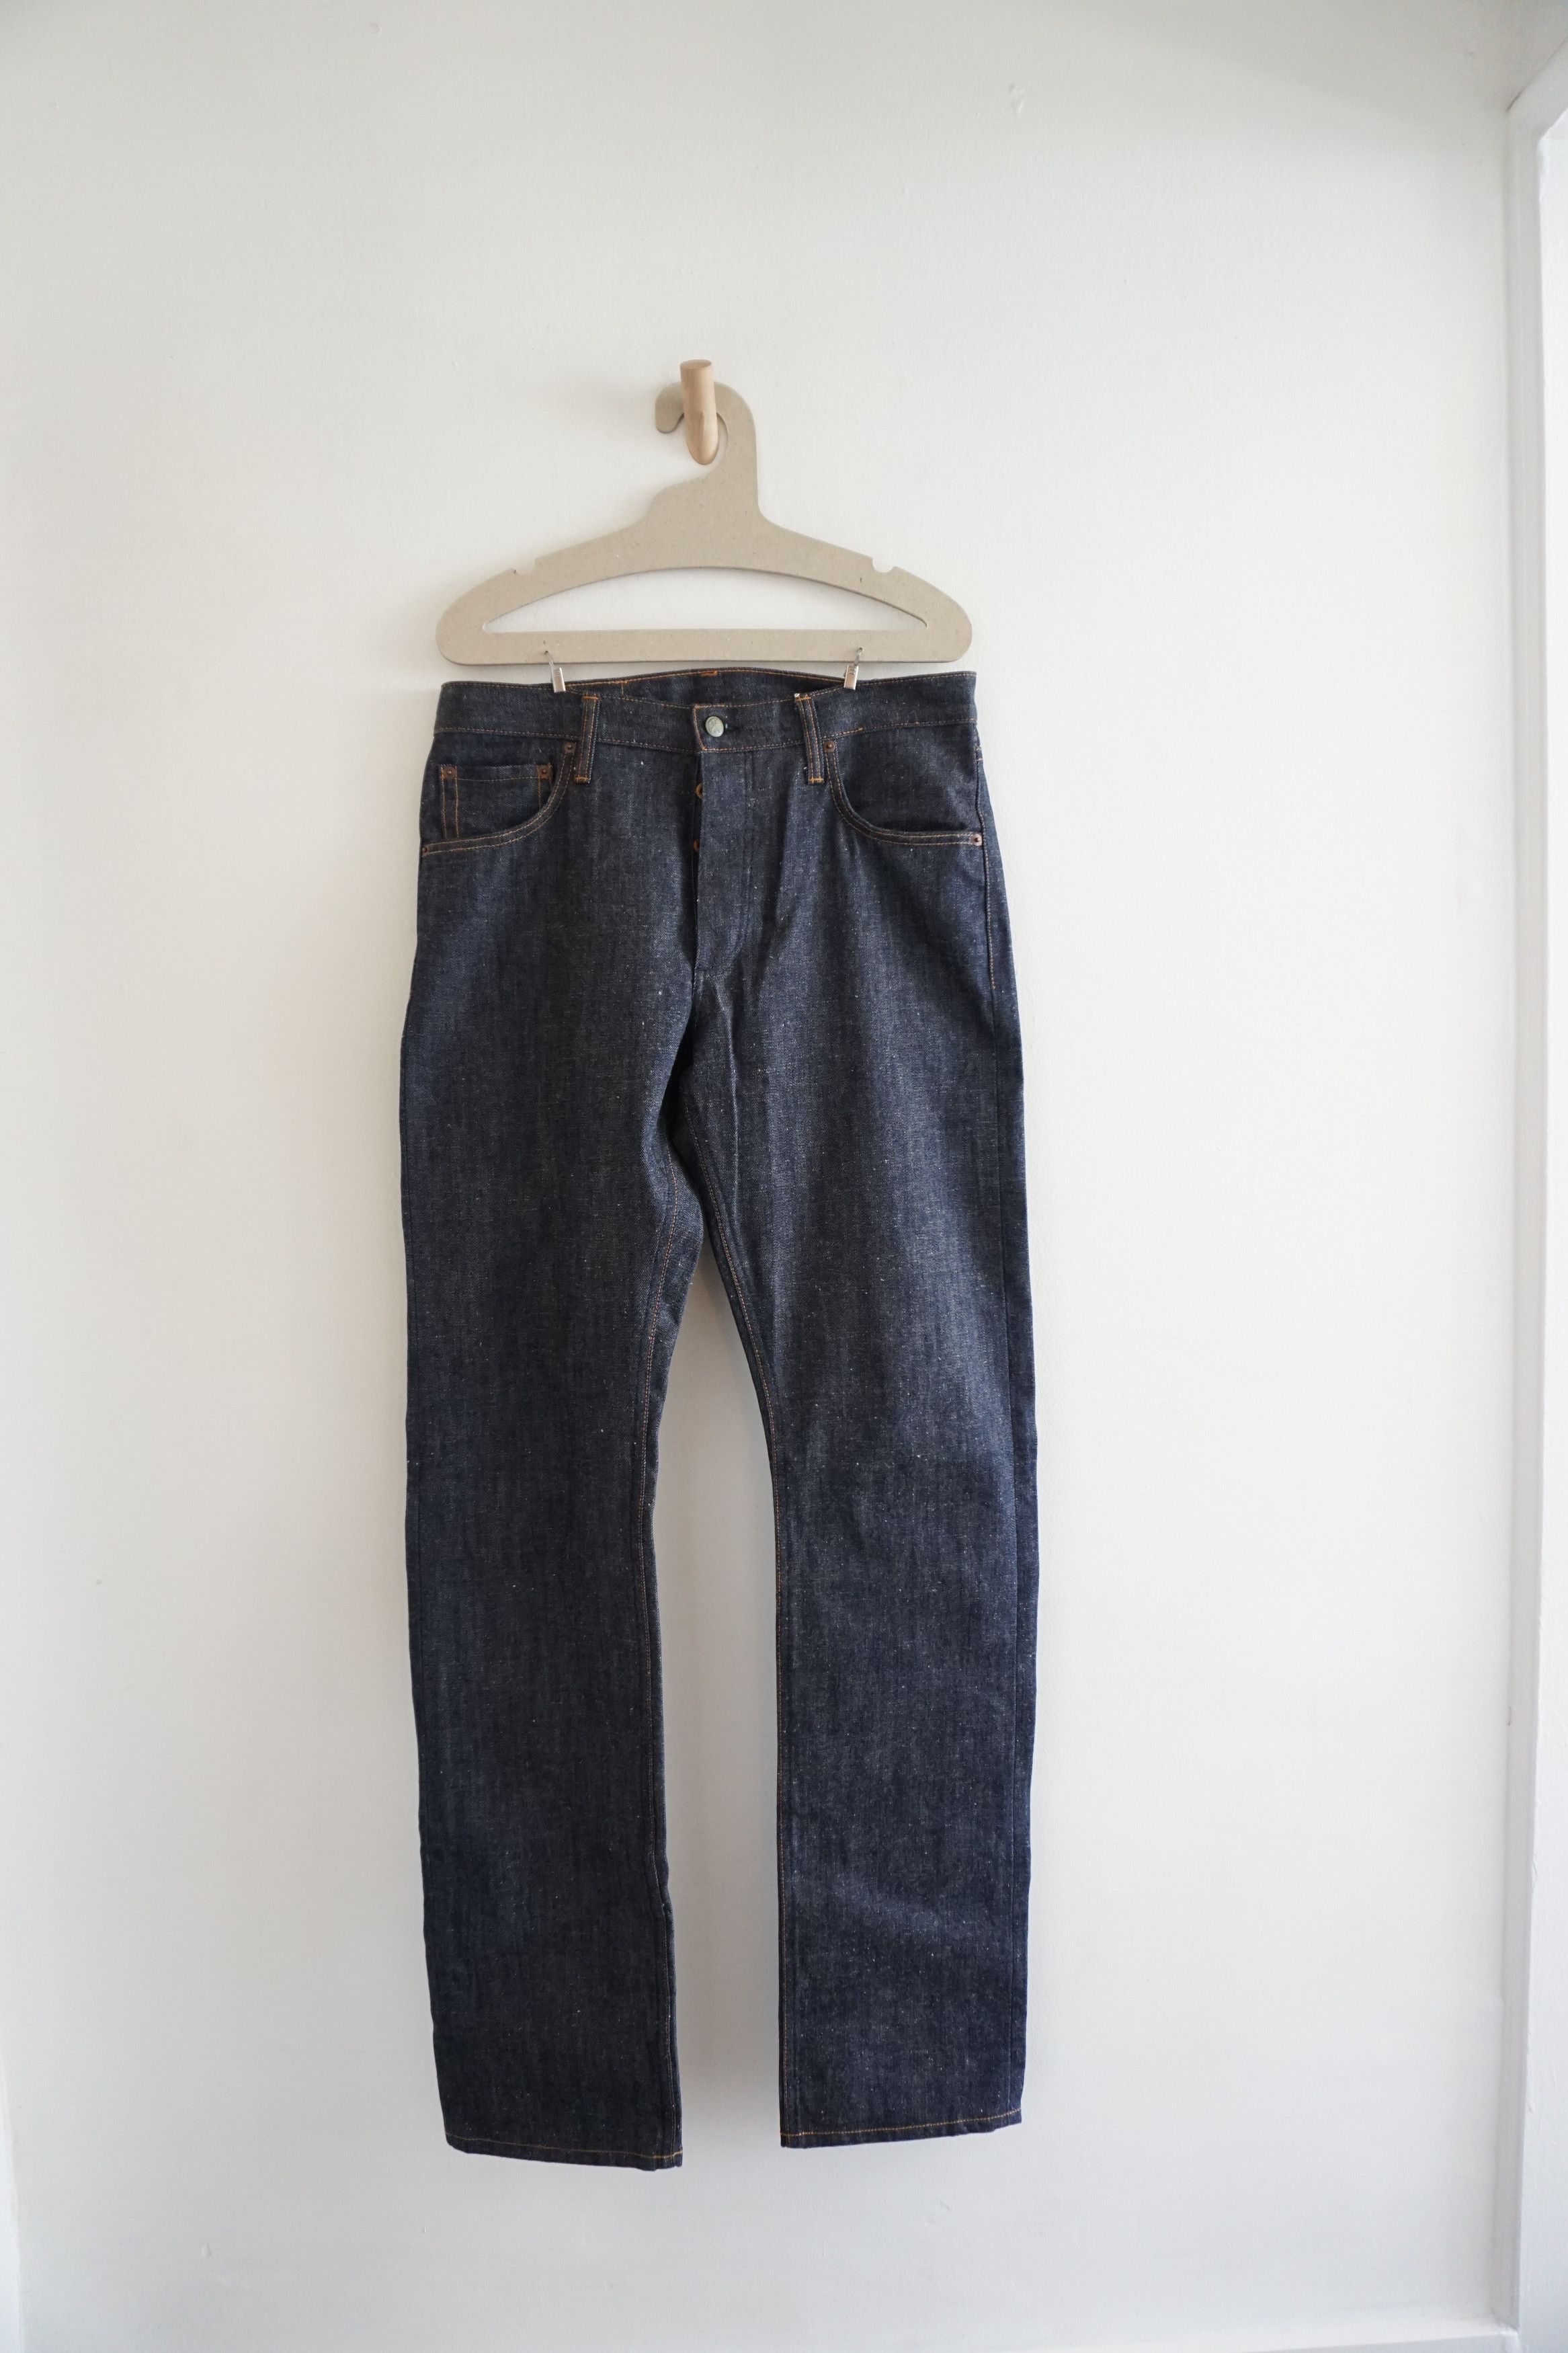 Left Field Nyc Greaser jean candiani 14 oz Size US 33 - 1 Preview